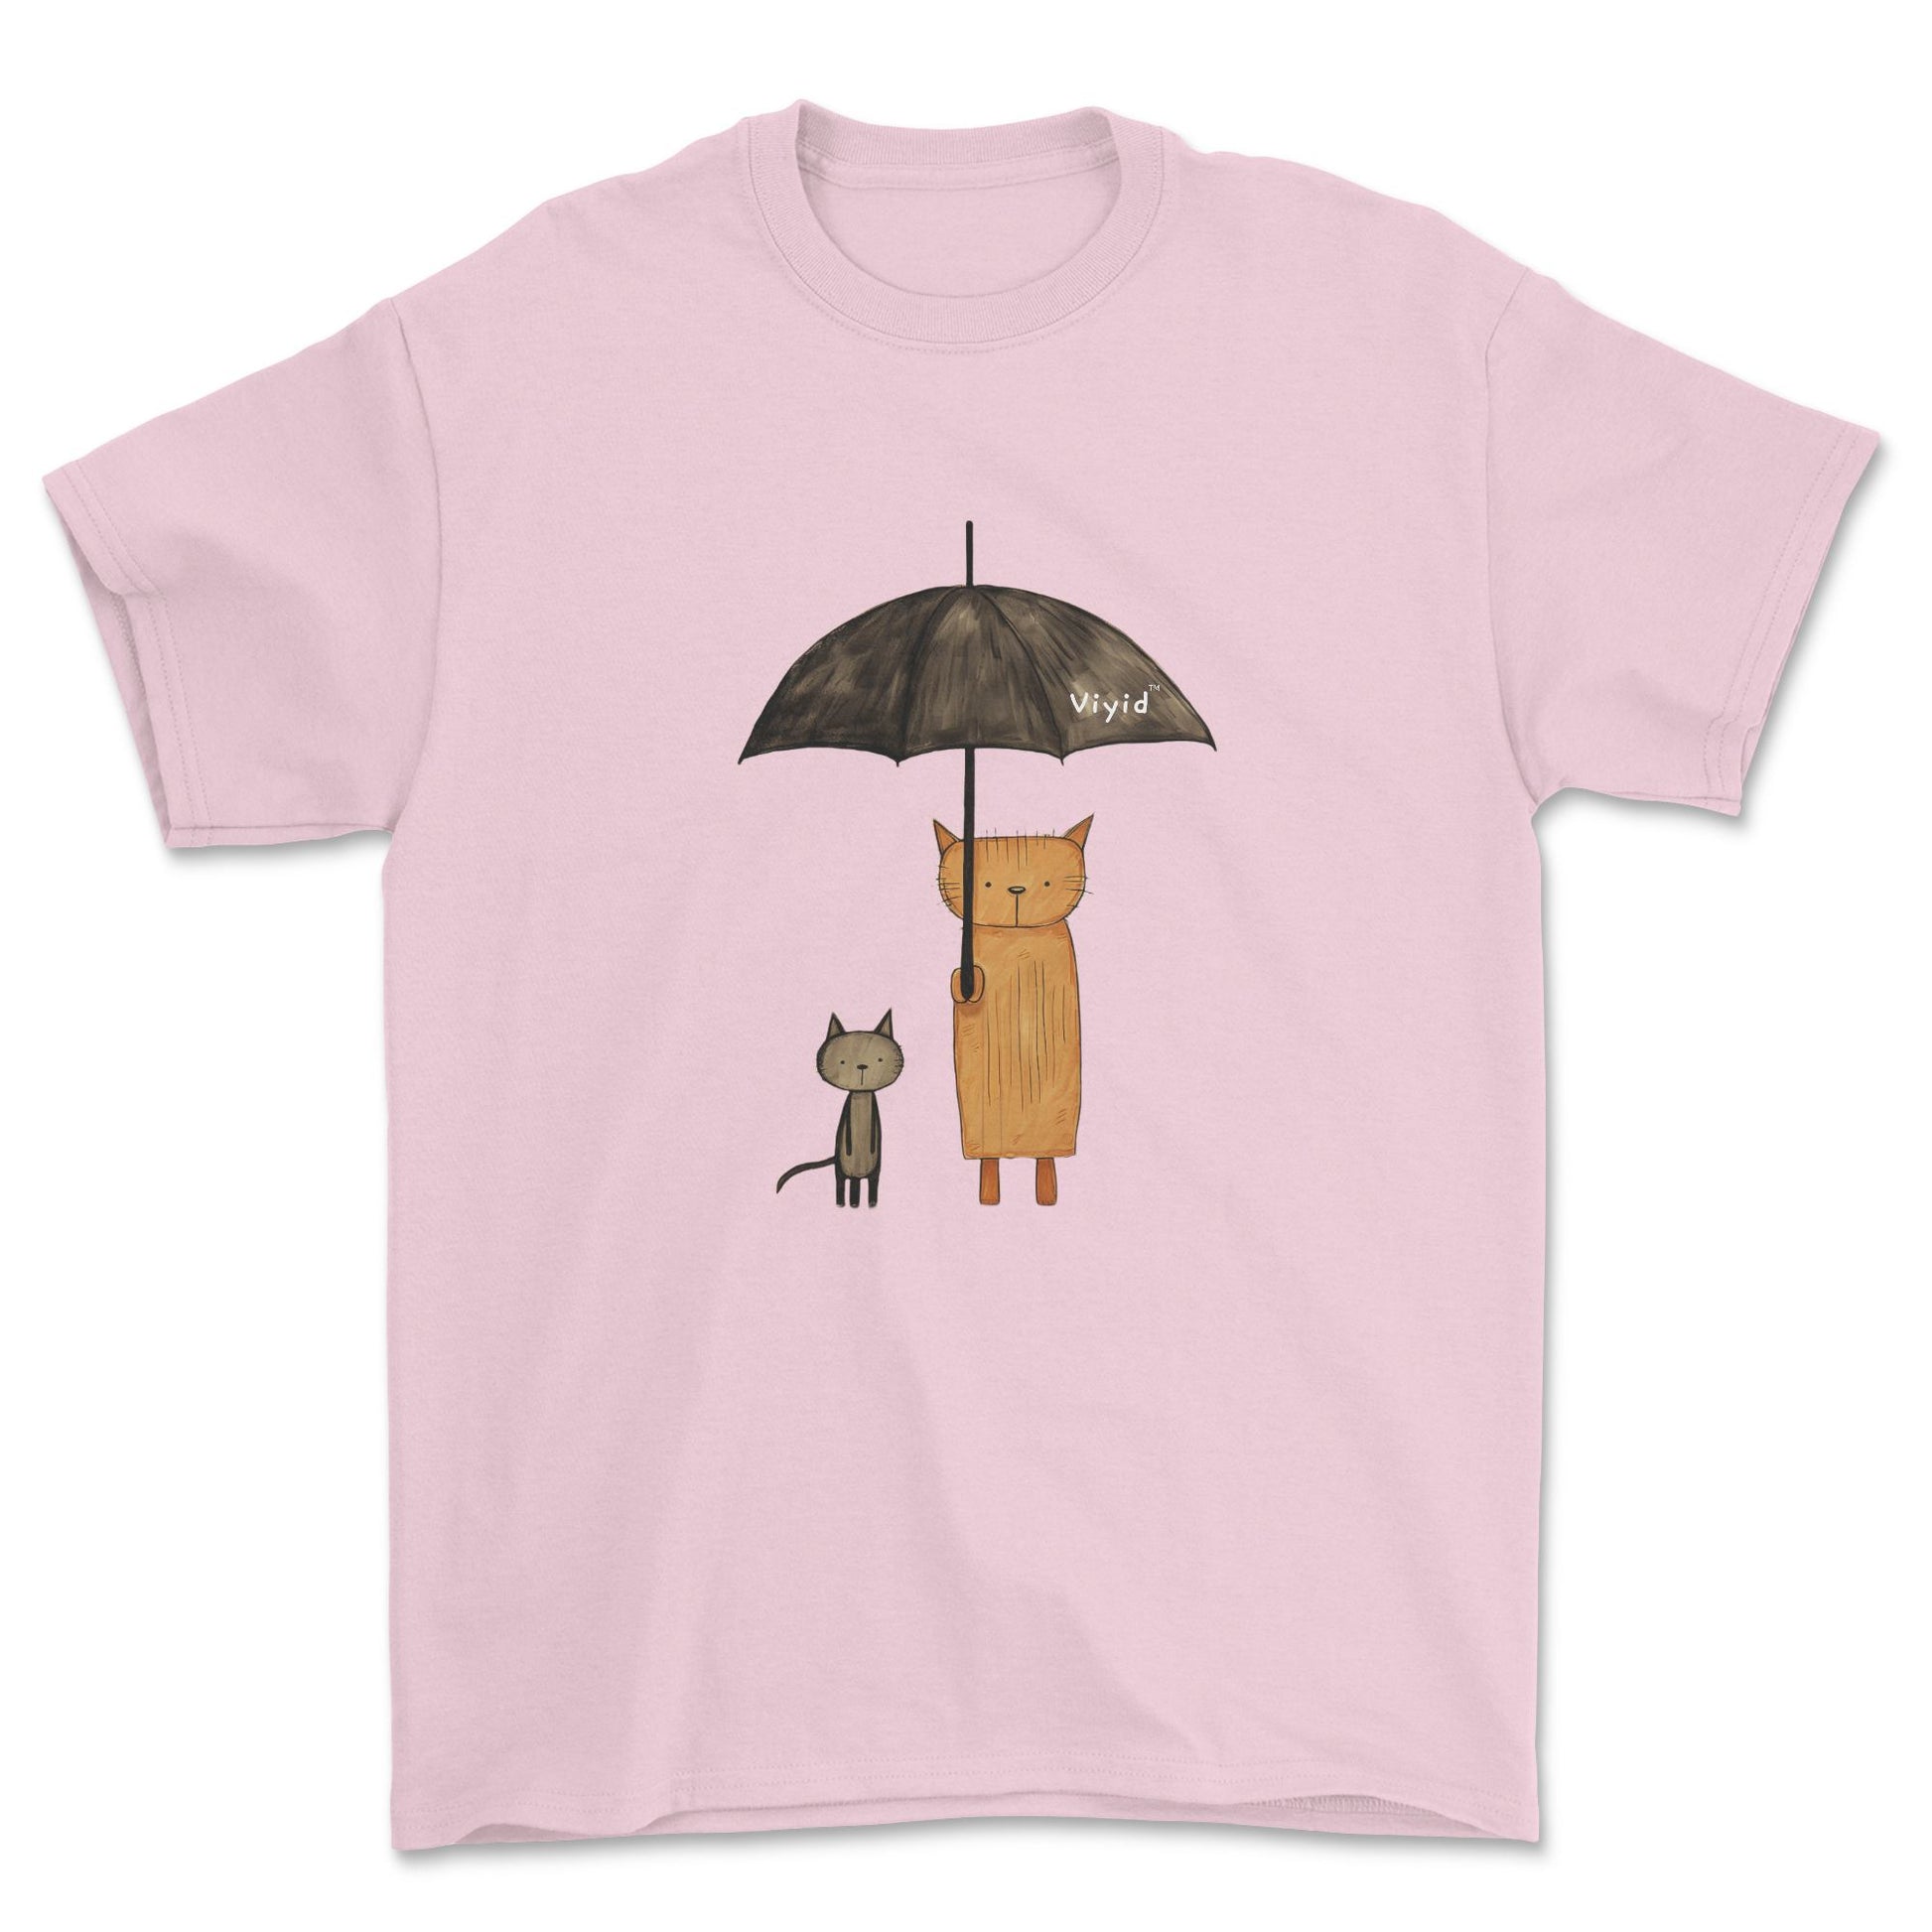 abstract cats with umbrella adult t-shirt light pink